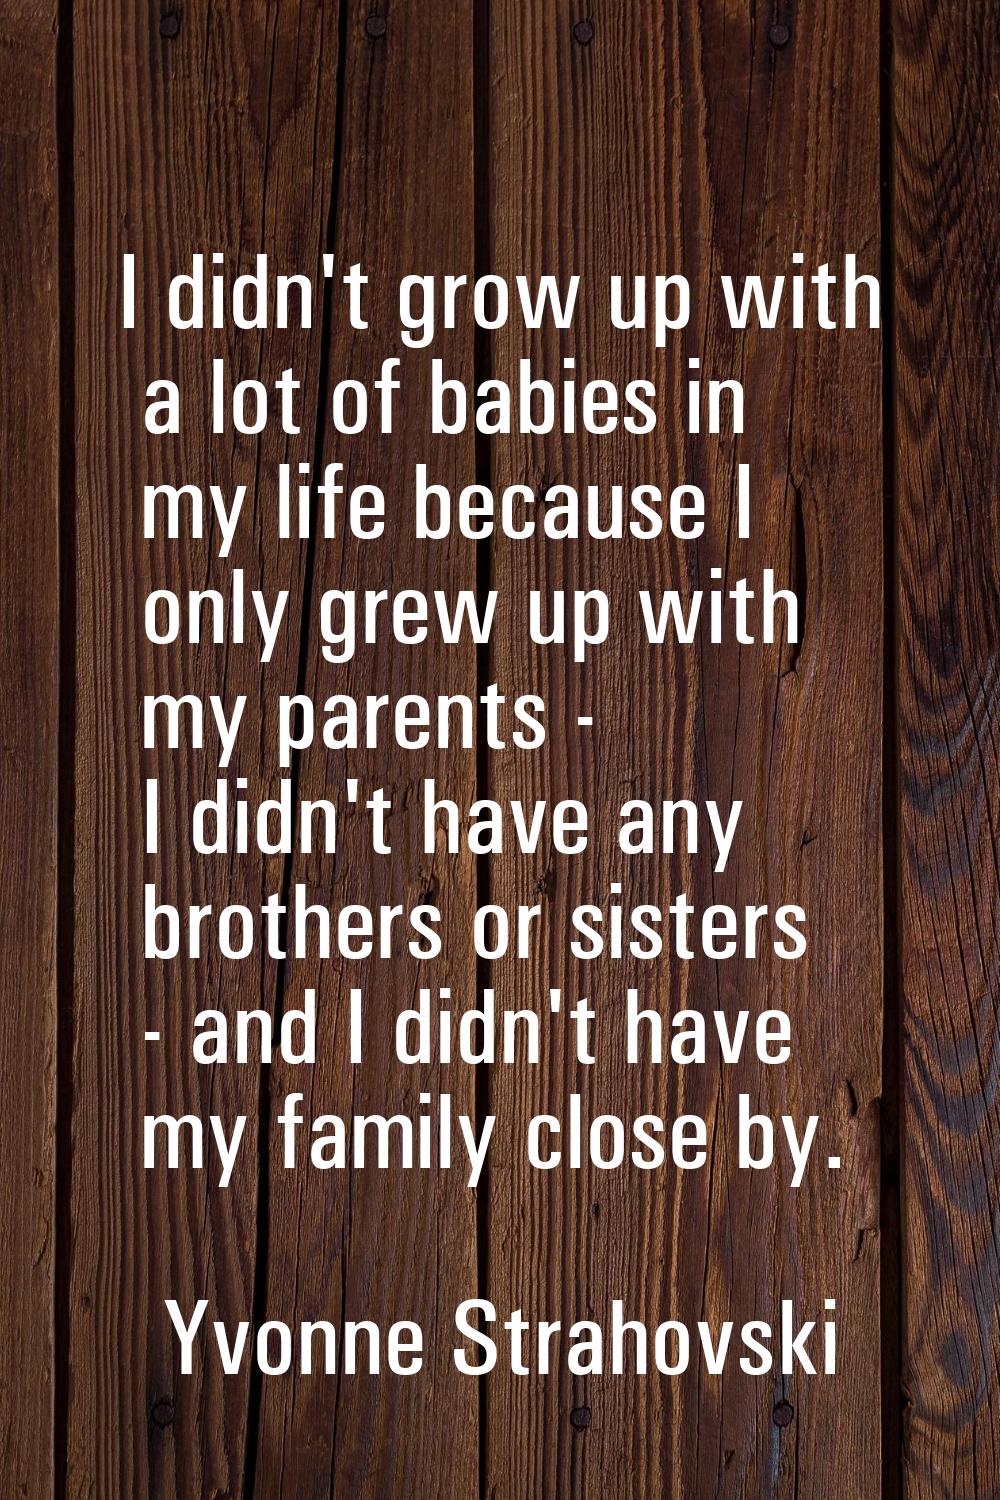 I didn't grow up with a lot of babies in my life because I only grew up with my parents - I didn't 